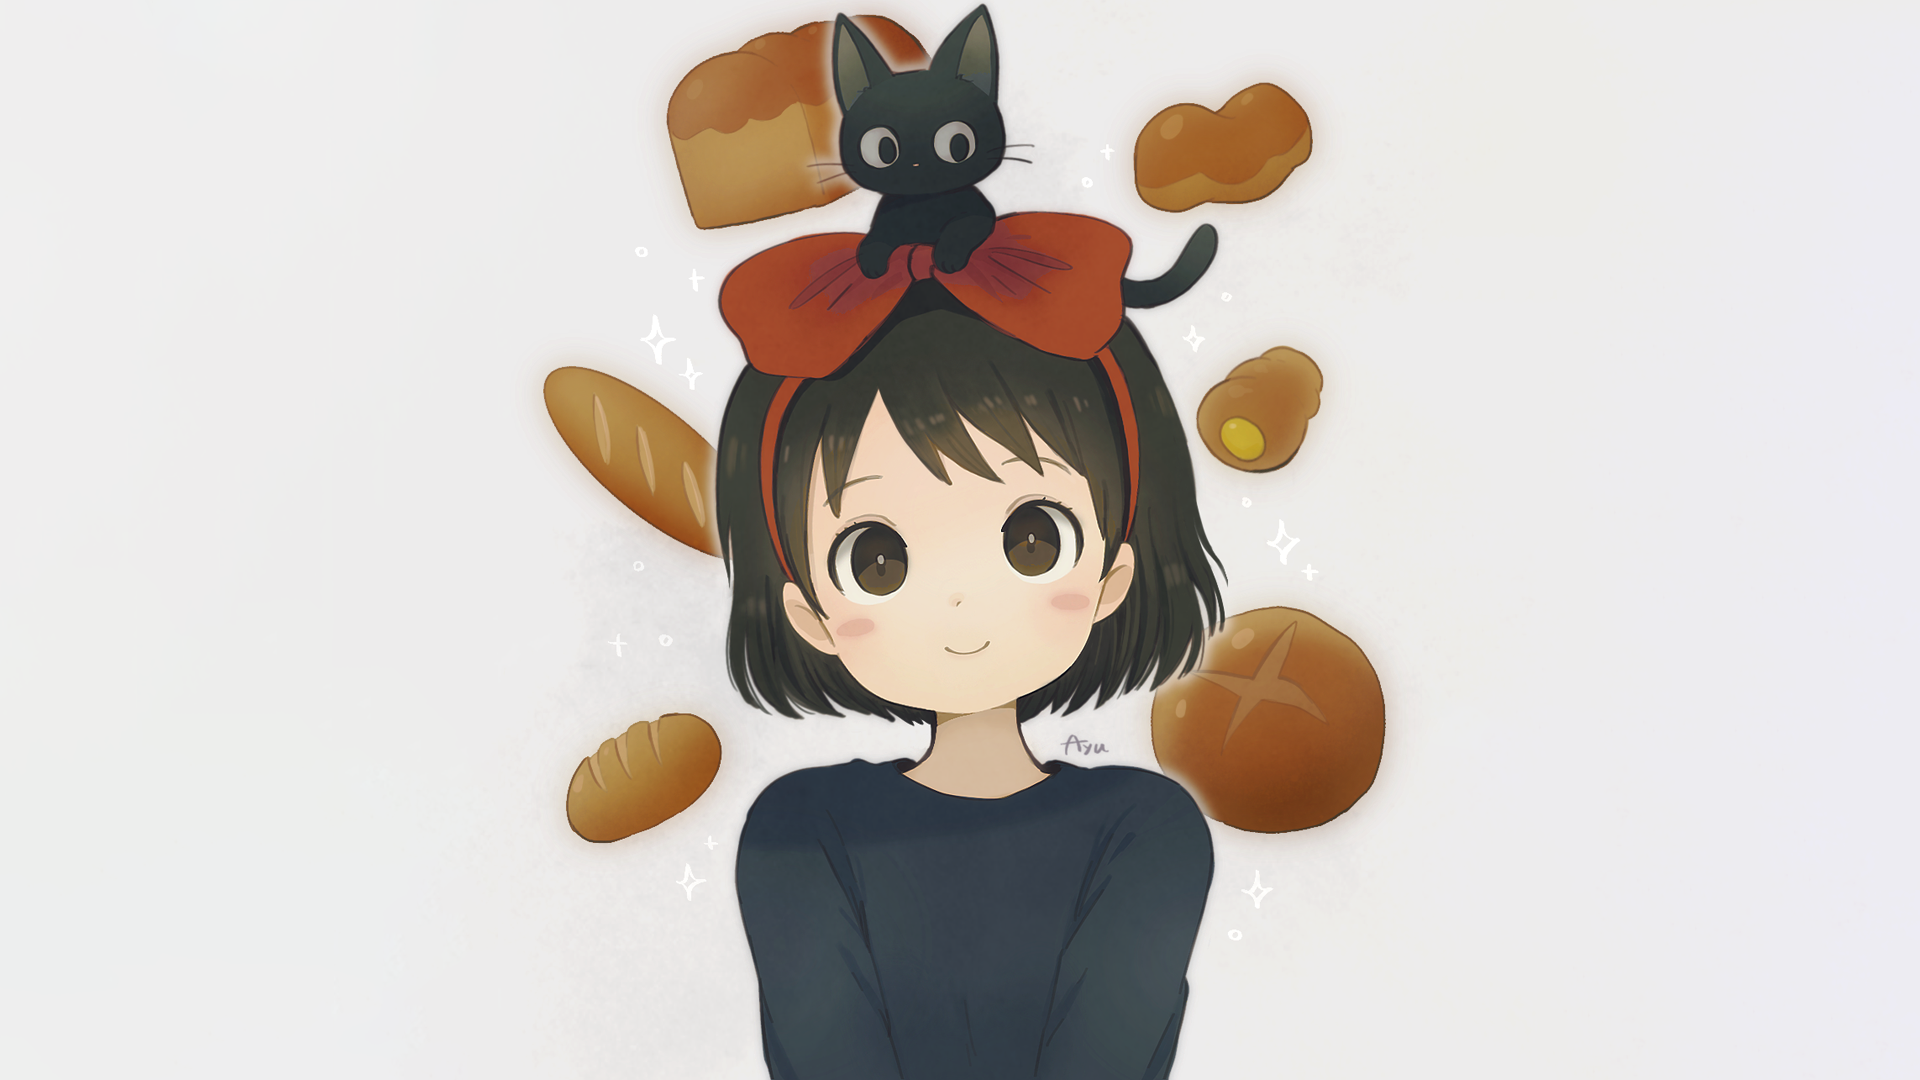 Anime 1920x1080 anime anime girls simple background Studio Ghibli jiji cats black cats smiling bread short hair Kiki's Delivery Service white background dark eyes looking at viewer animals mammals food